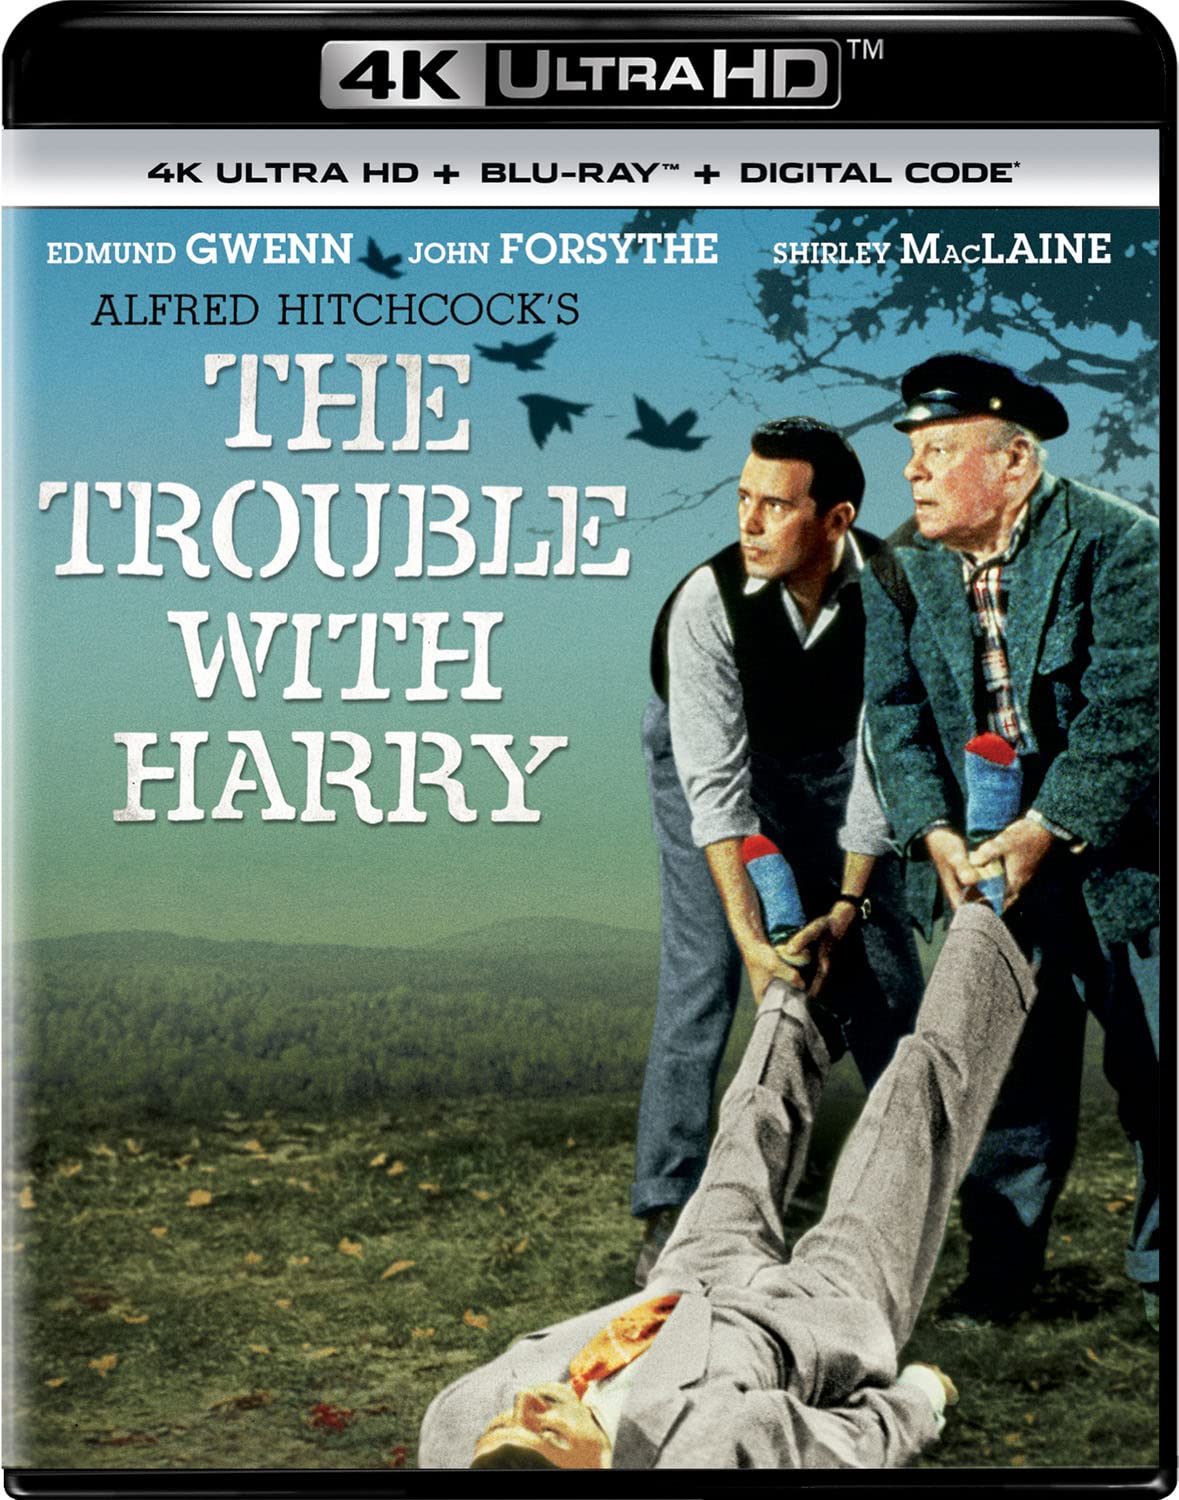 The Trouble With Harry 1955 4k Blu-ray